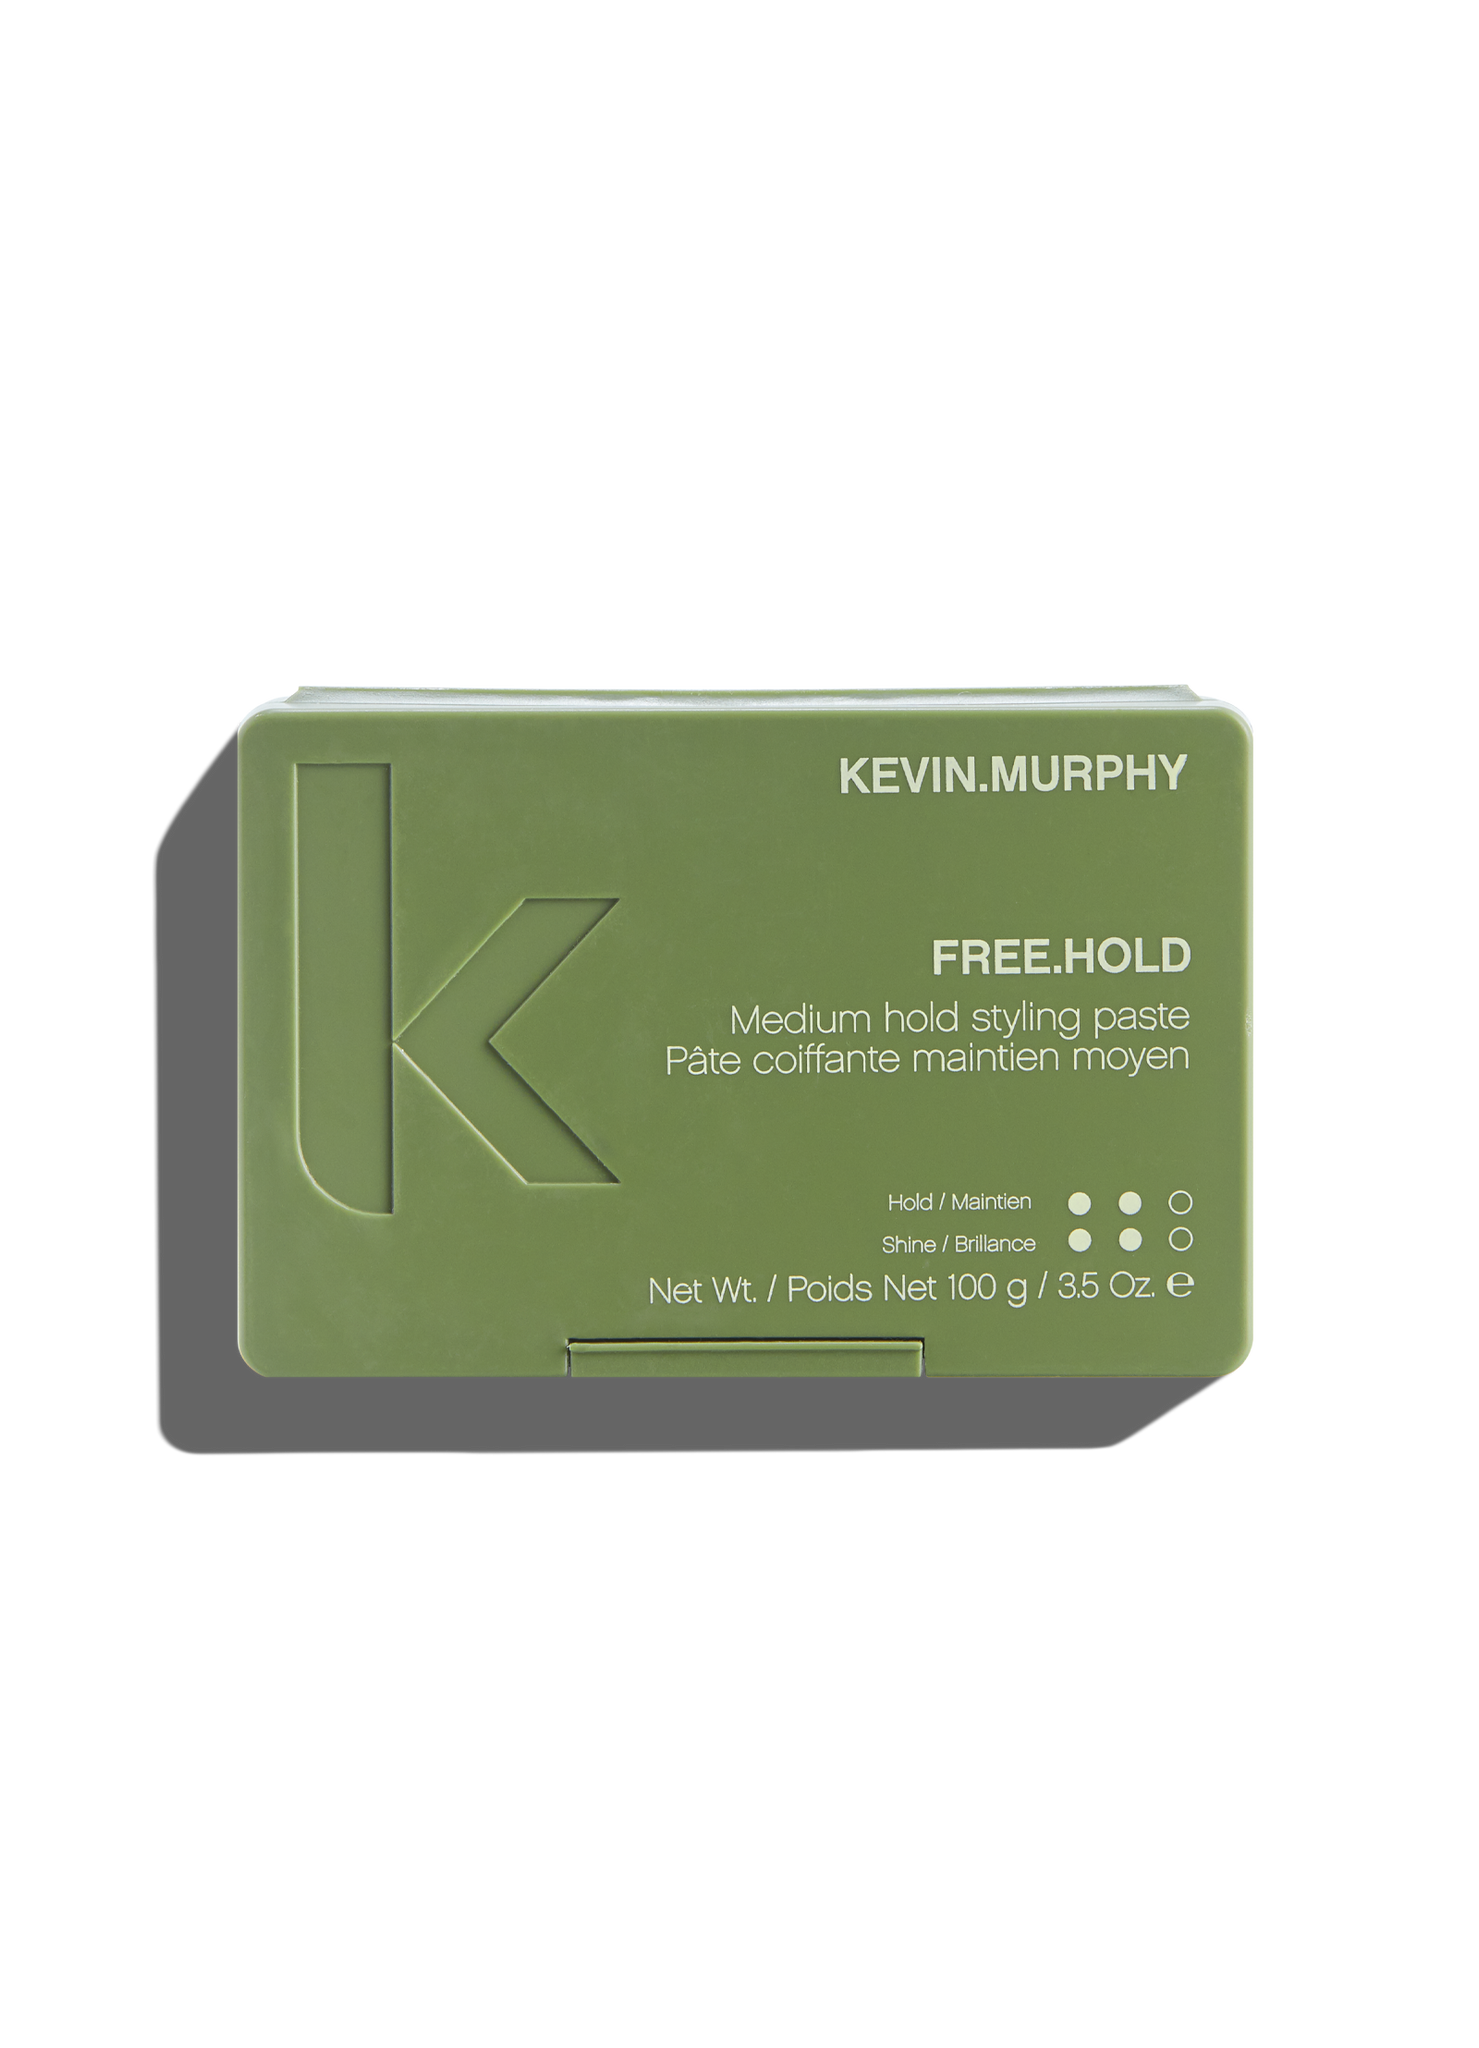 KEVIN MURPHY FREE HOLD